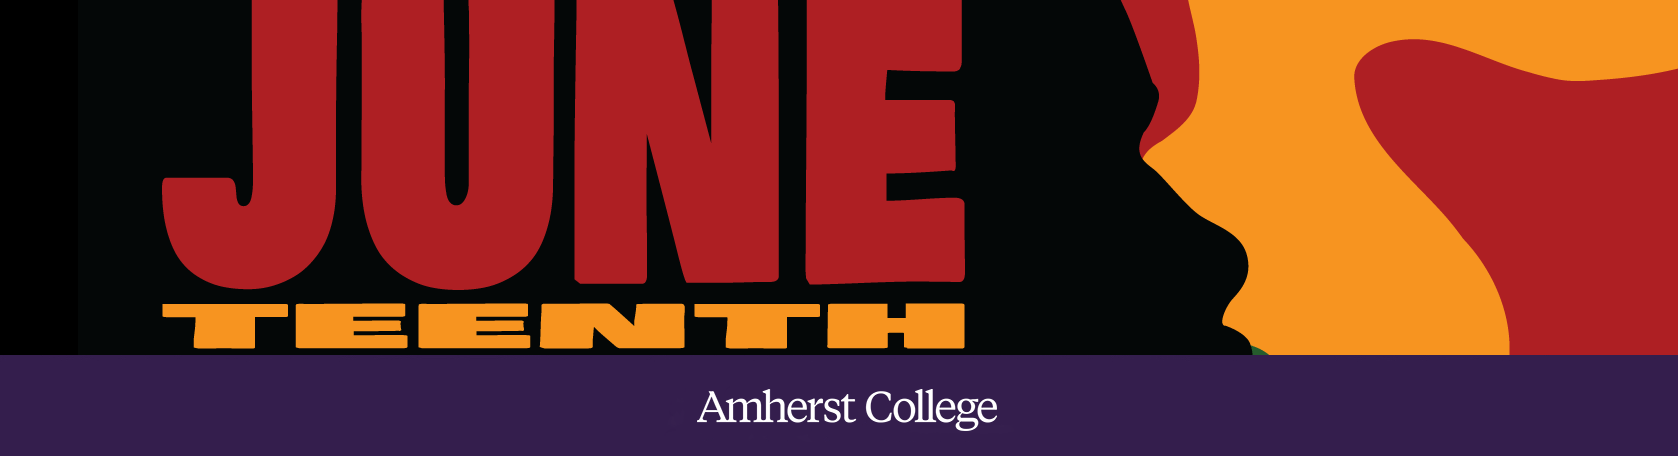 Amherst College Celebrates Juneteenth Freedom Day